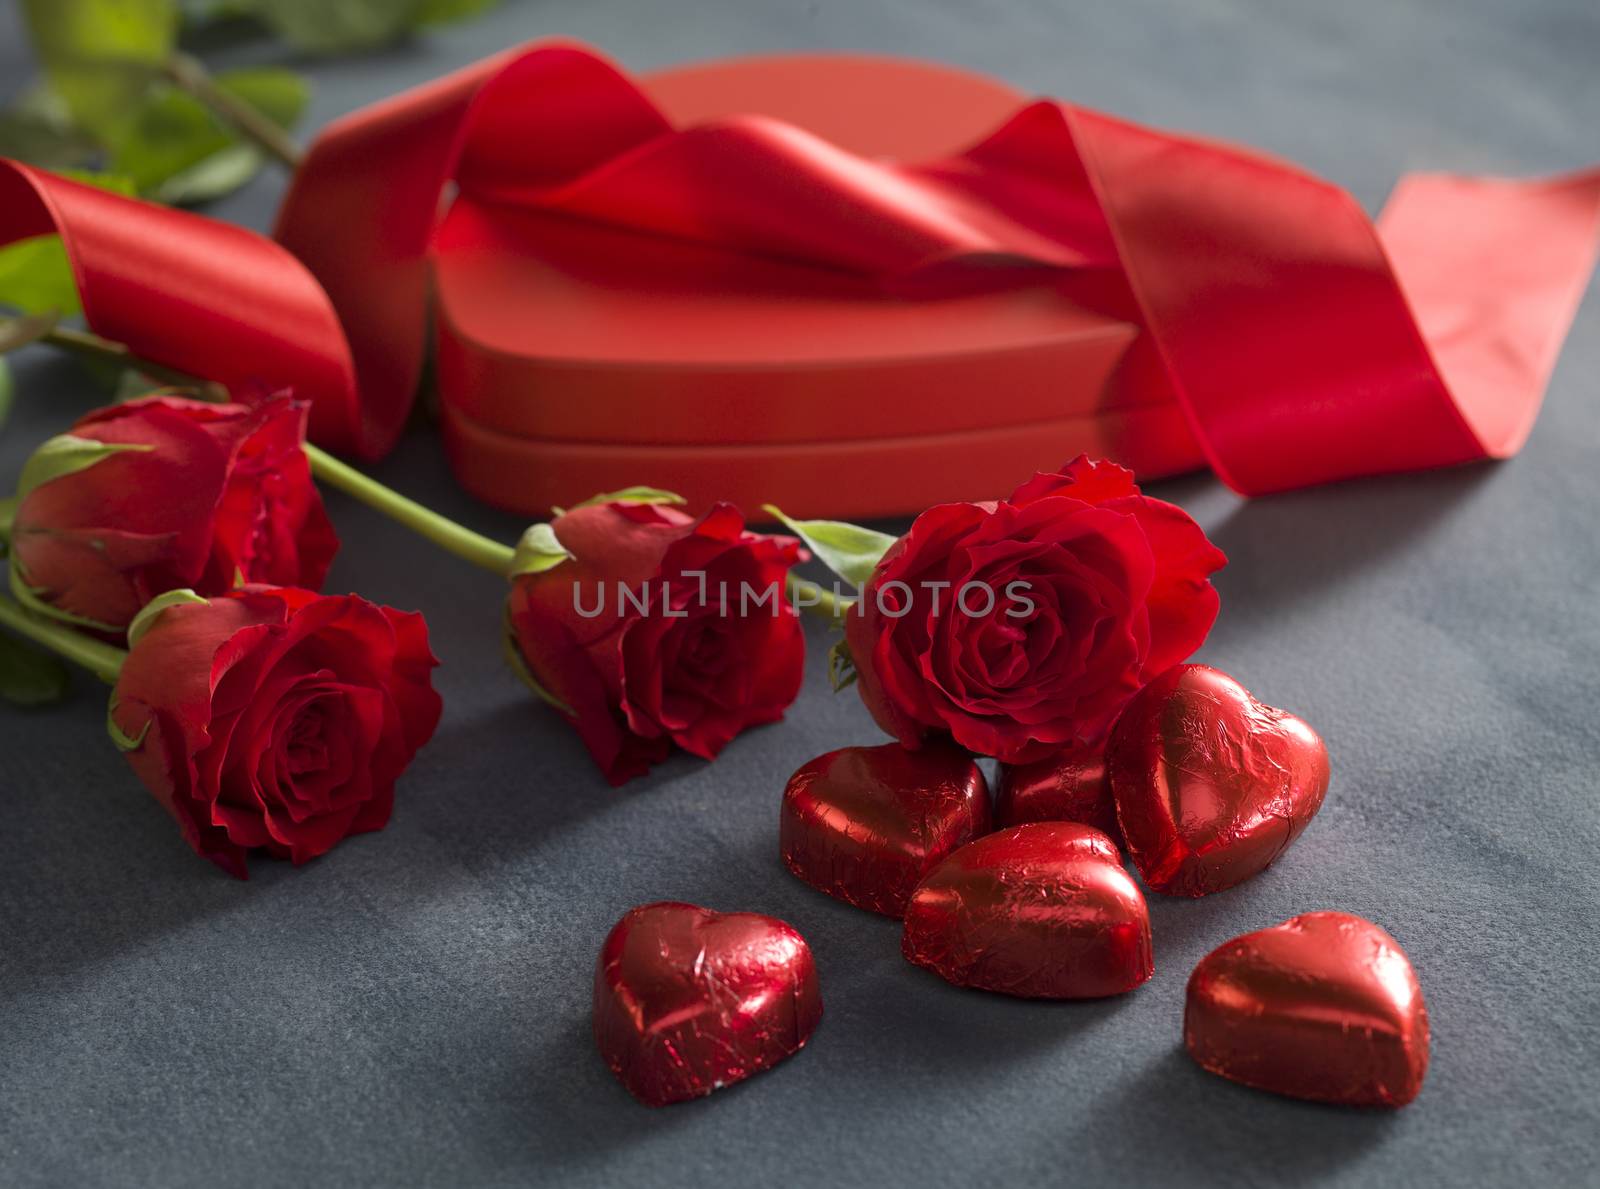 red hearts chocolates in front of red roses and hart shaped box by janssenkruseproductions